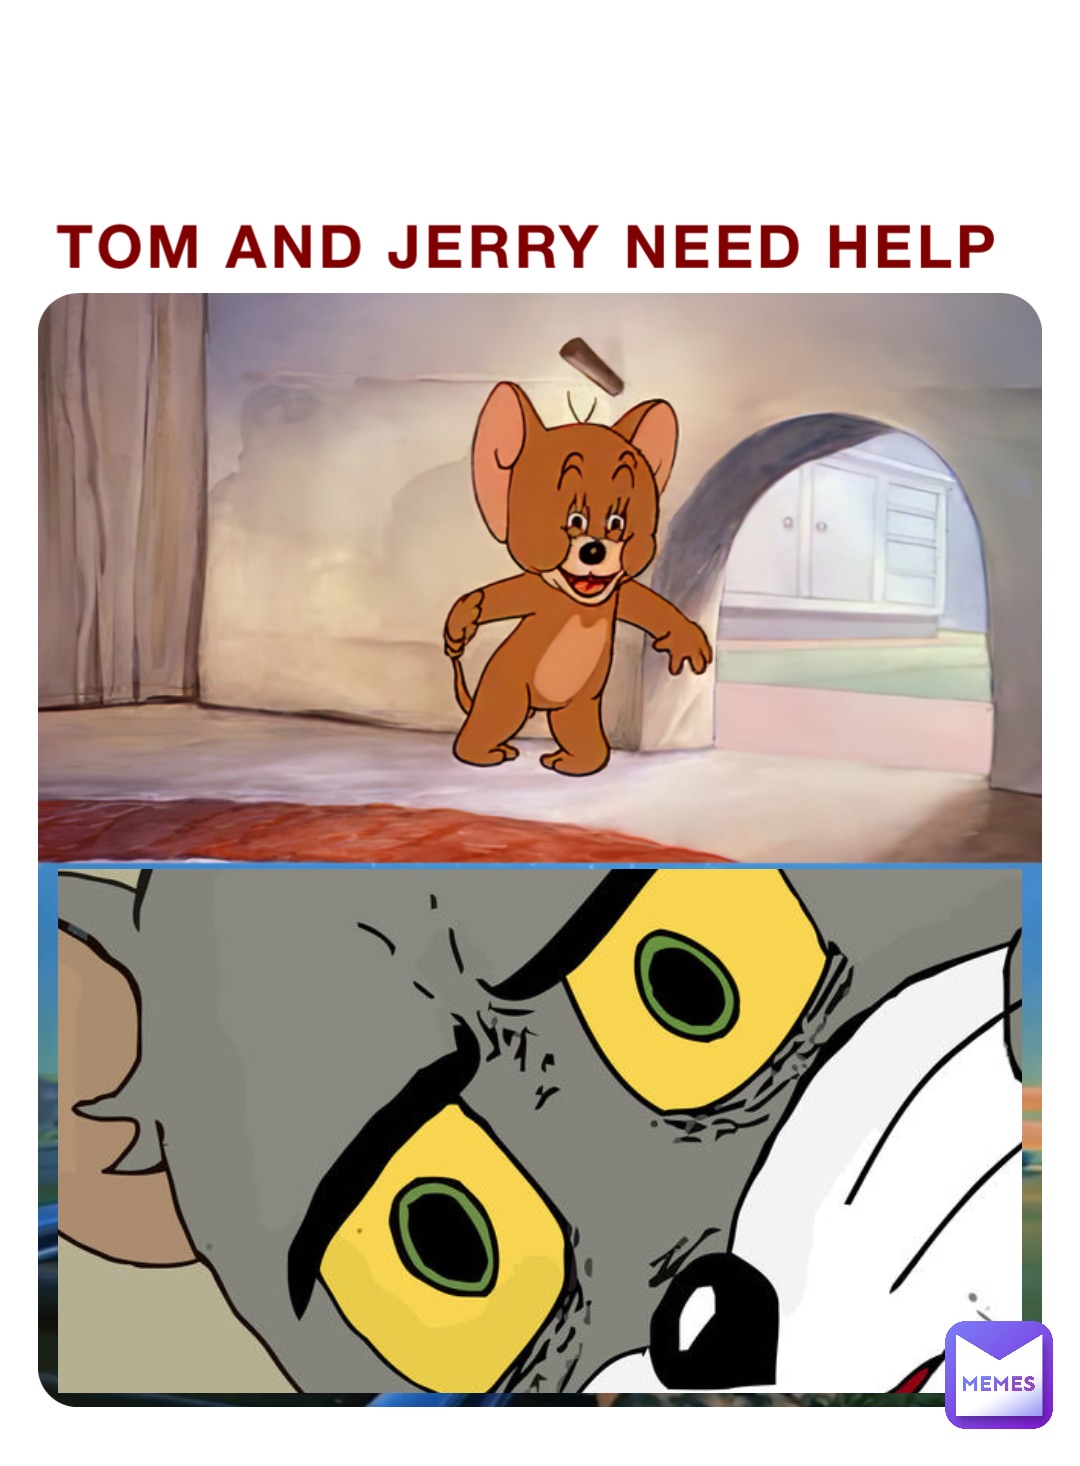 Tom and Jerry need help